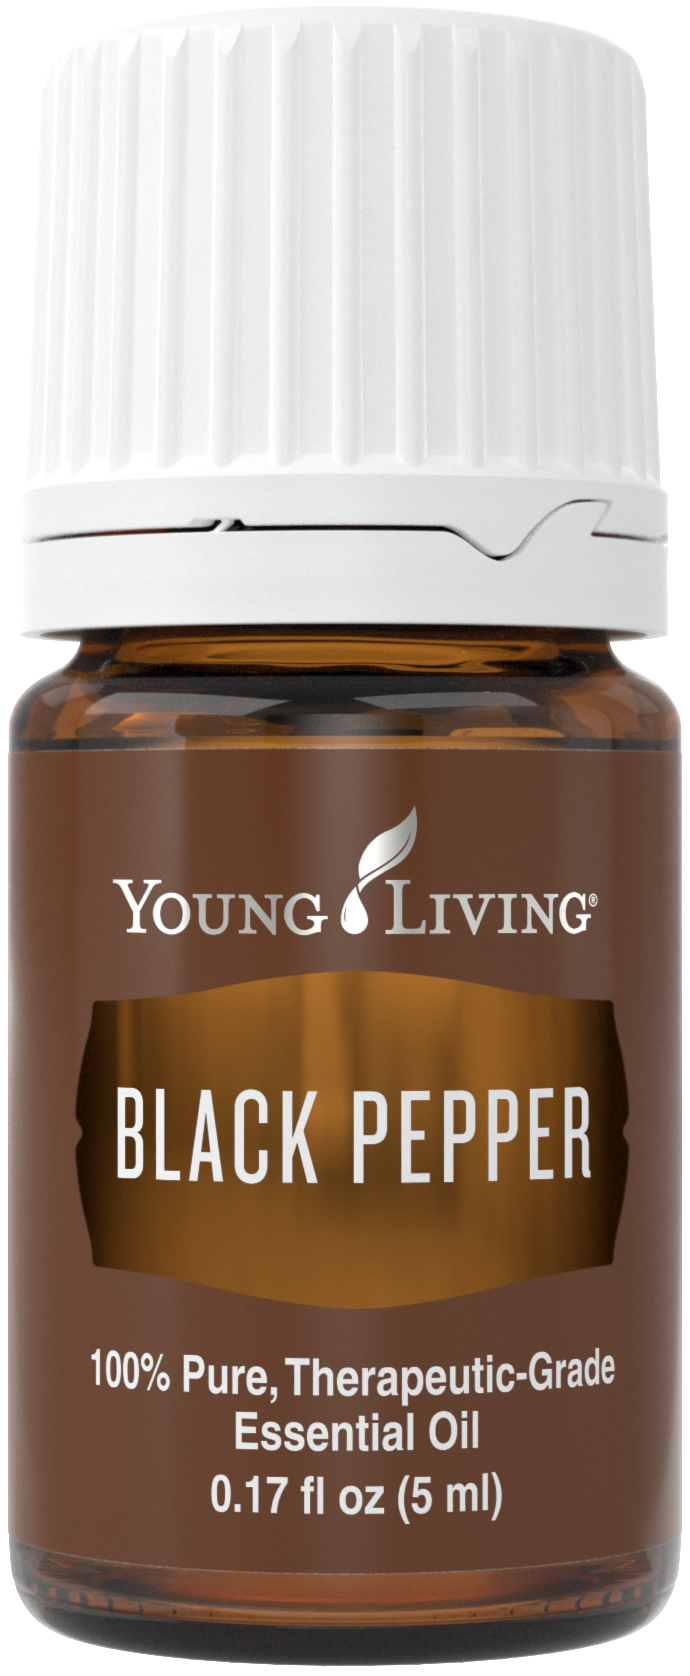 Young Living Black Pepper